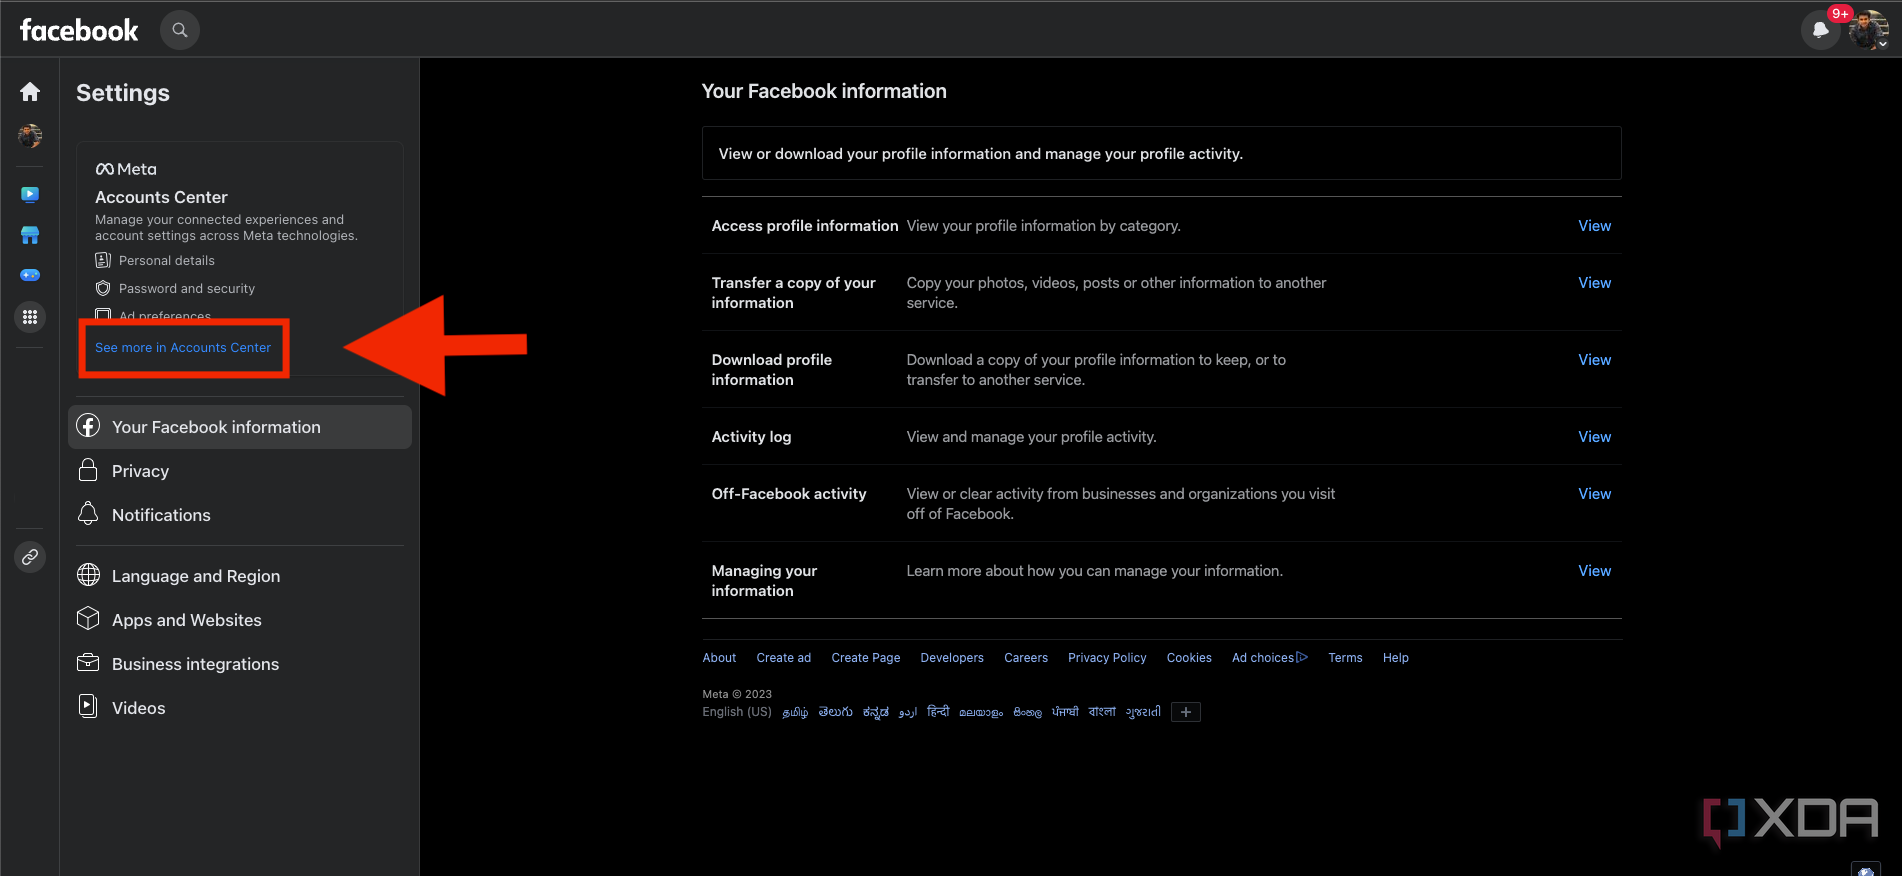 A screenshot showing the account information page in Facebook.